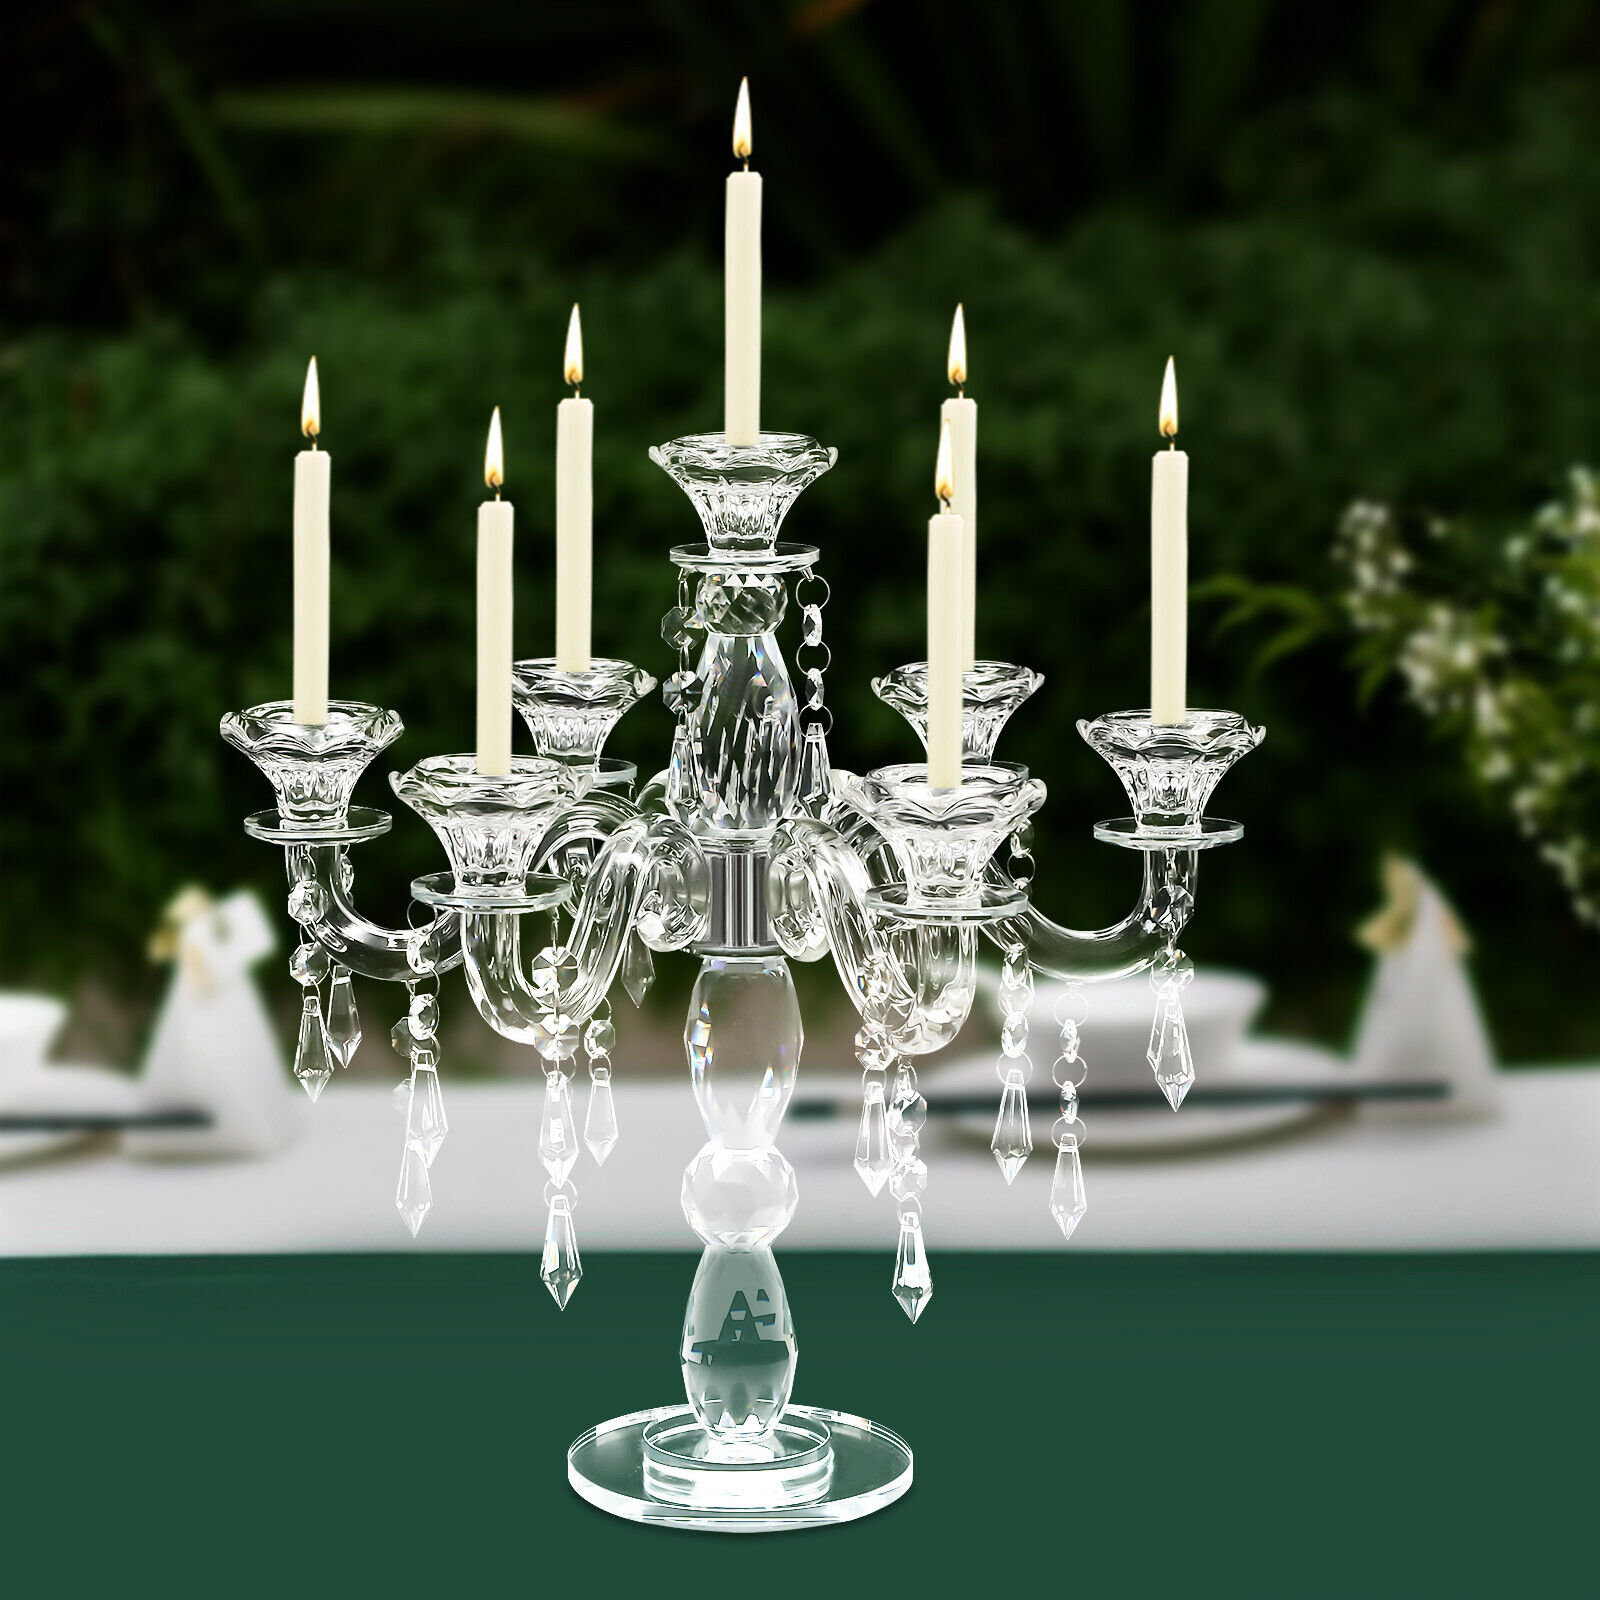 Crystal Candelabra Candlestick 7-arm Candle Holder Wedding Birthday Party Gift